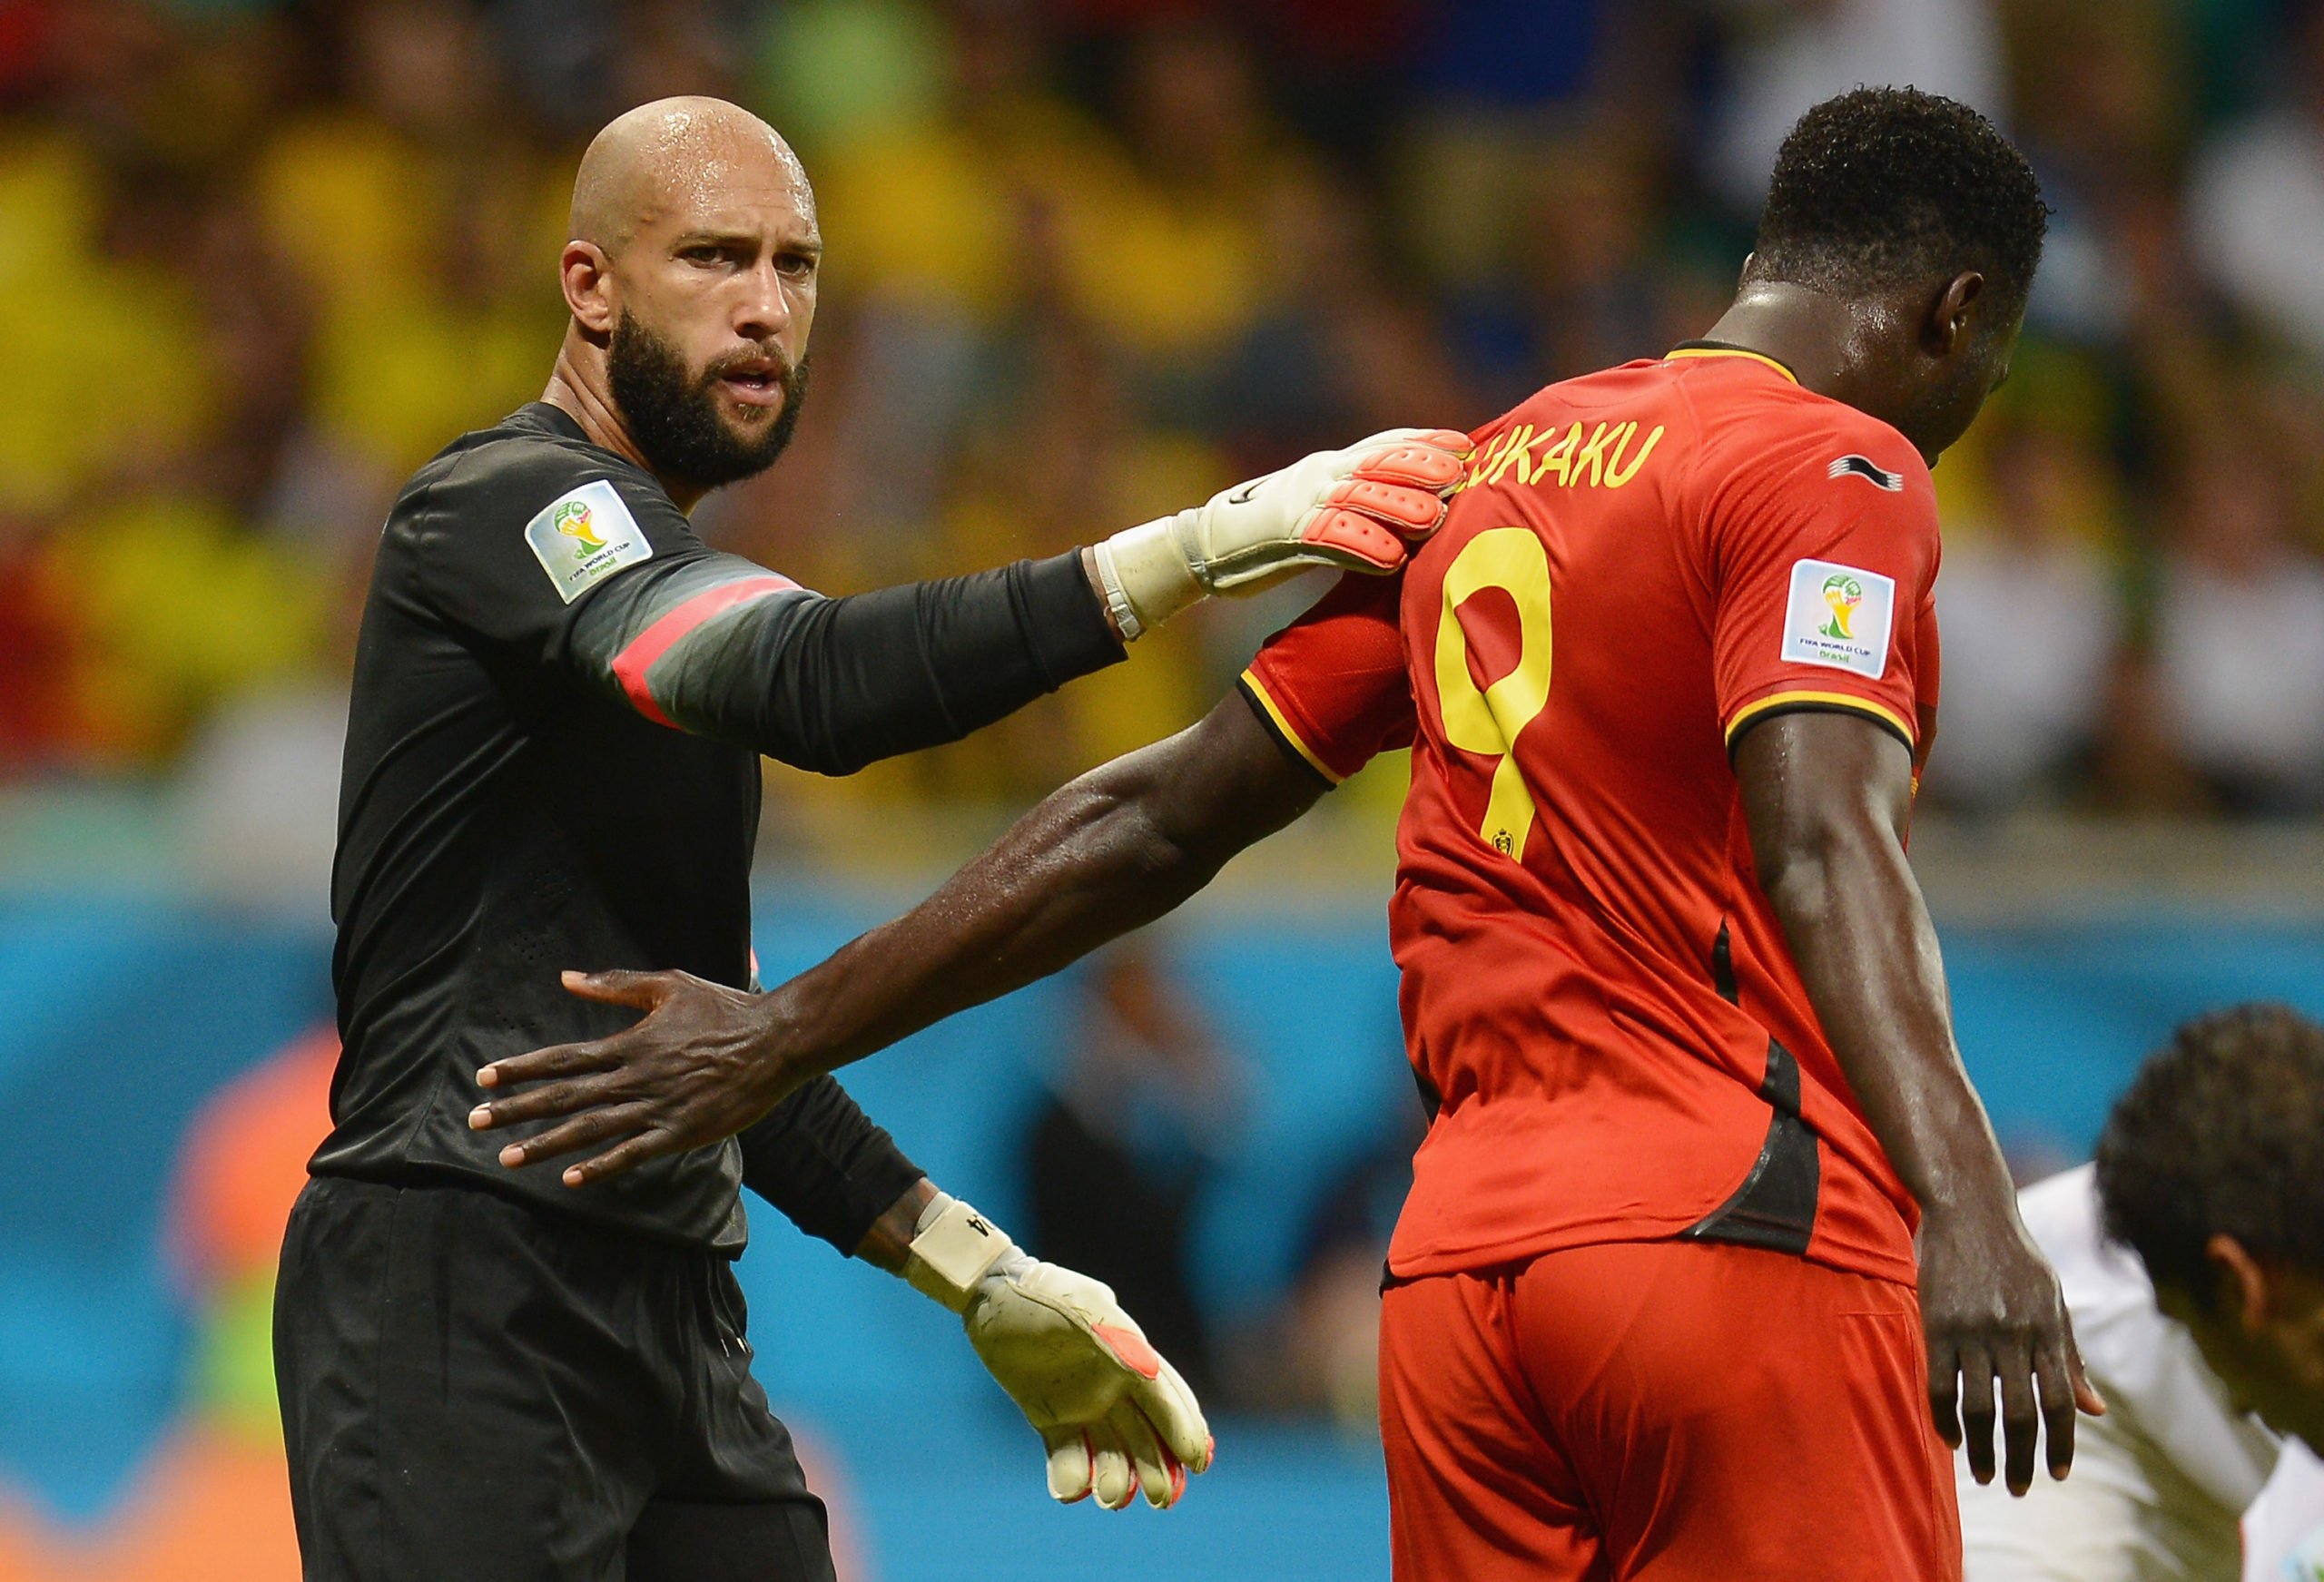 'I spoke to him': Tim Howard now shares what Romelu Lukaku told him in a private conversation recently